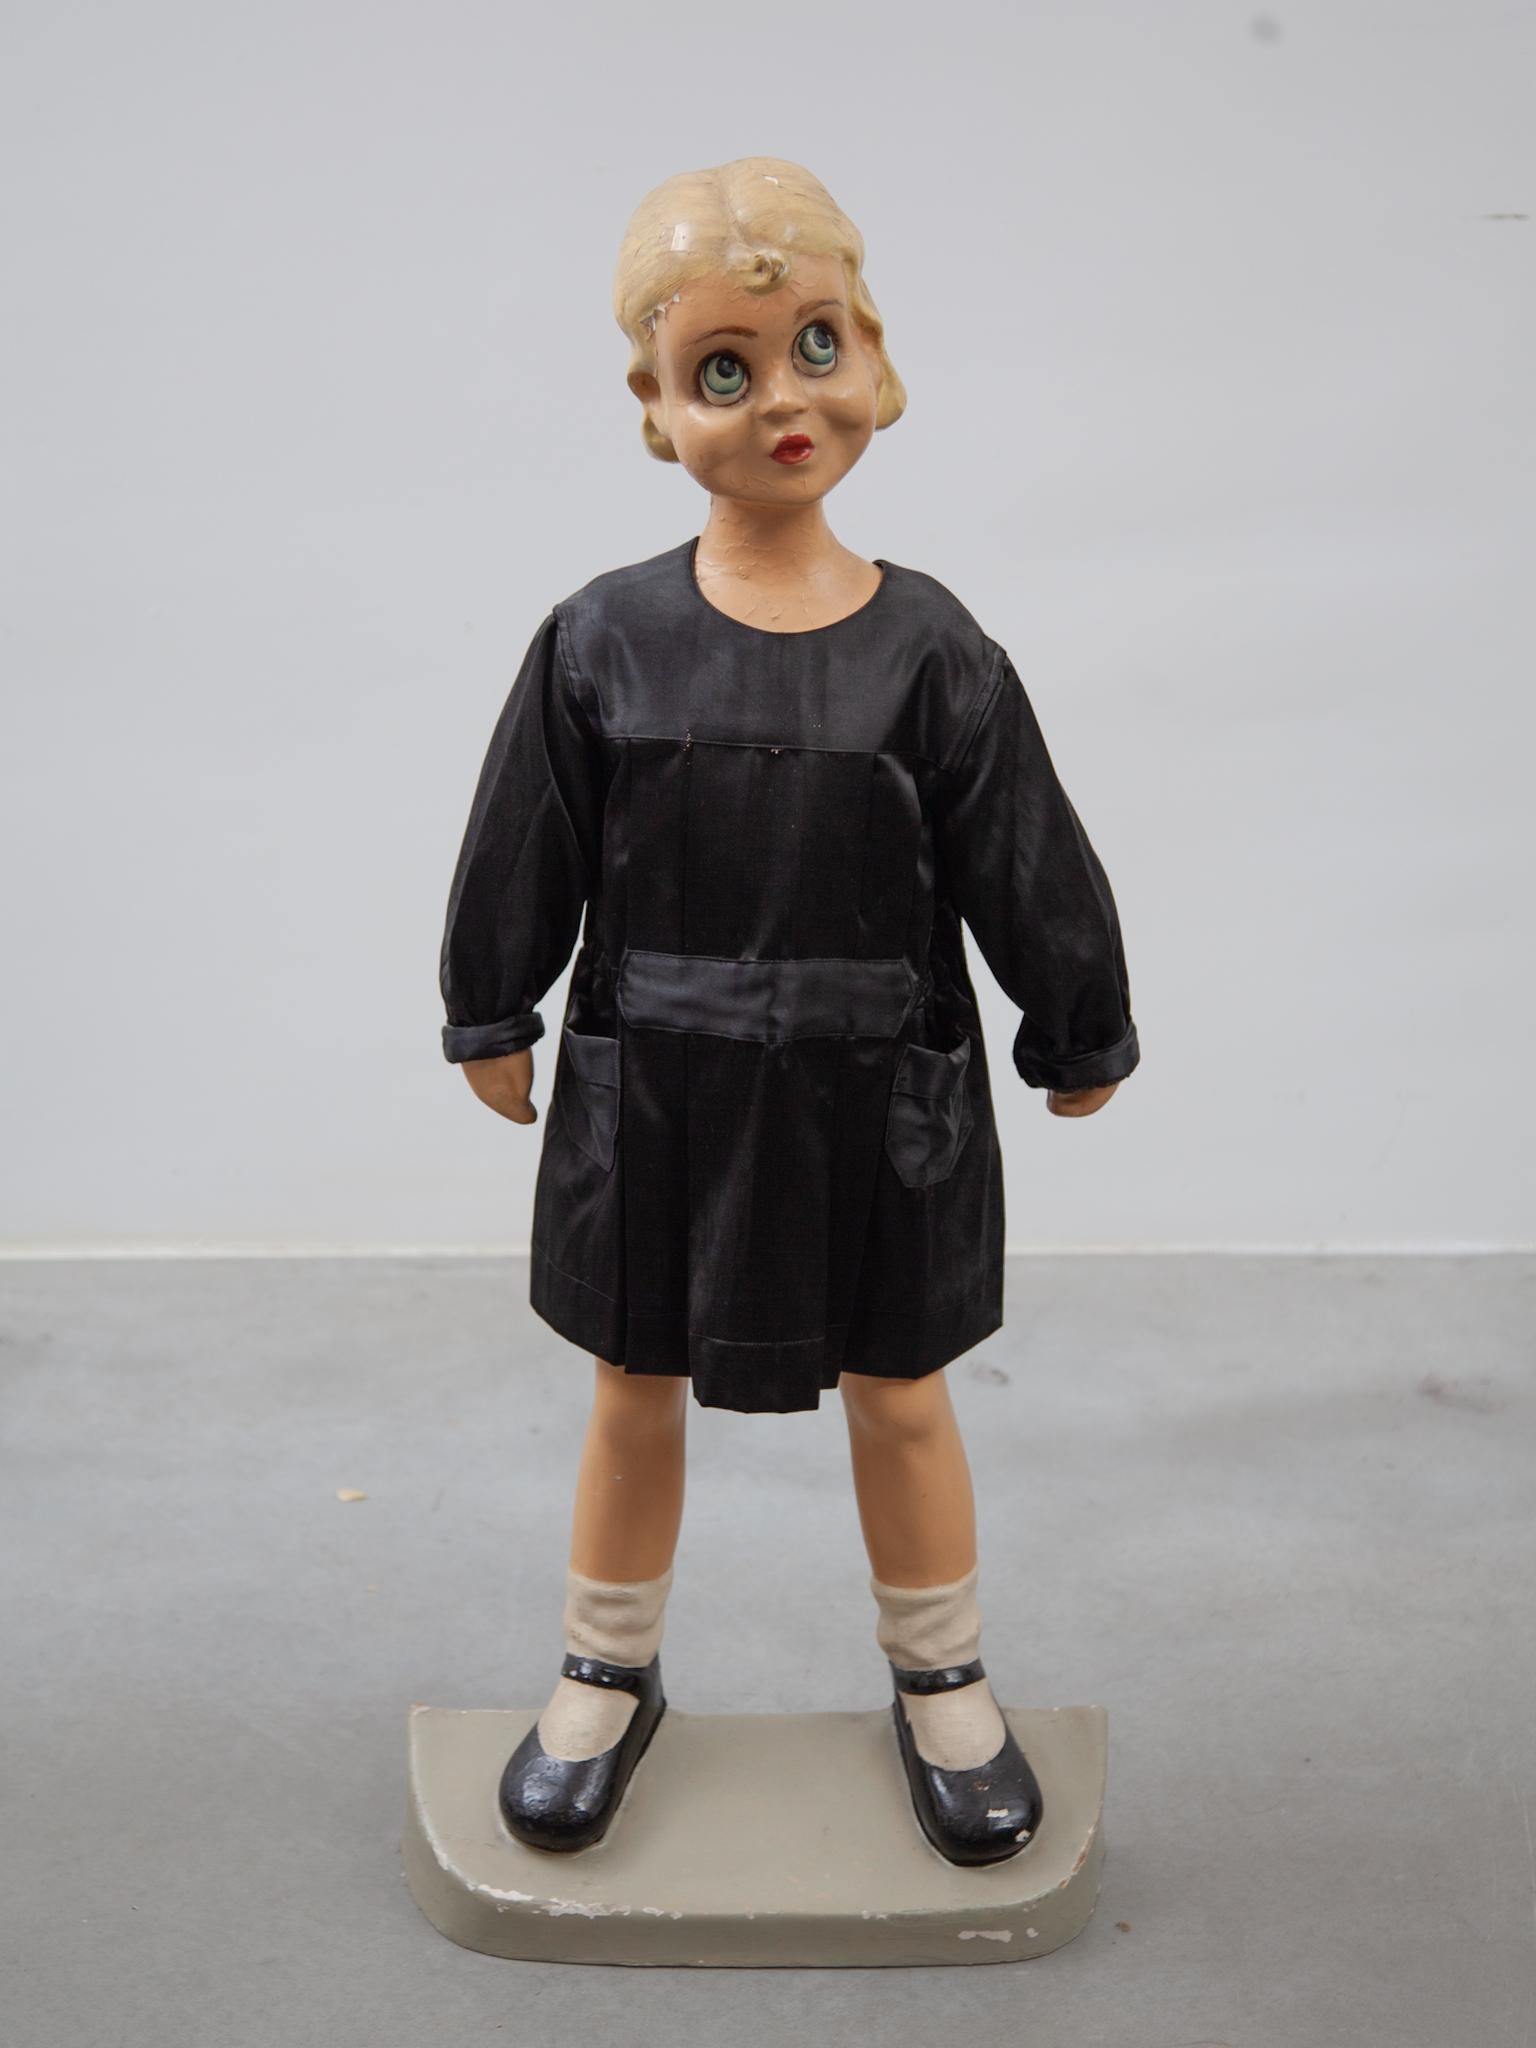 Original shop window display child mannequin for primary school clothing, she wears a black dress as an example for children's uniforms from the 1950s.